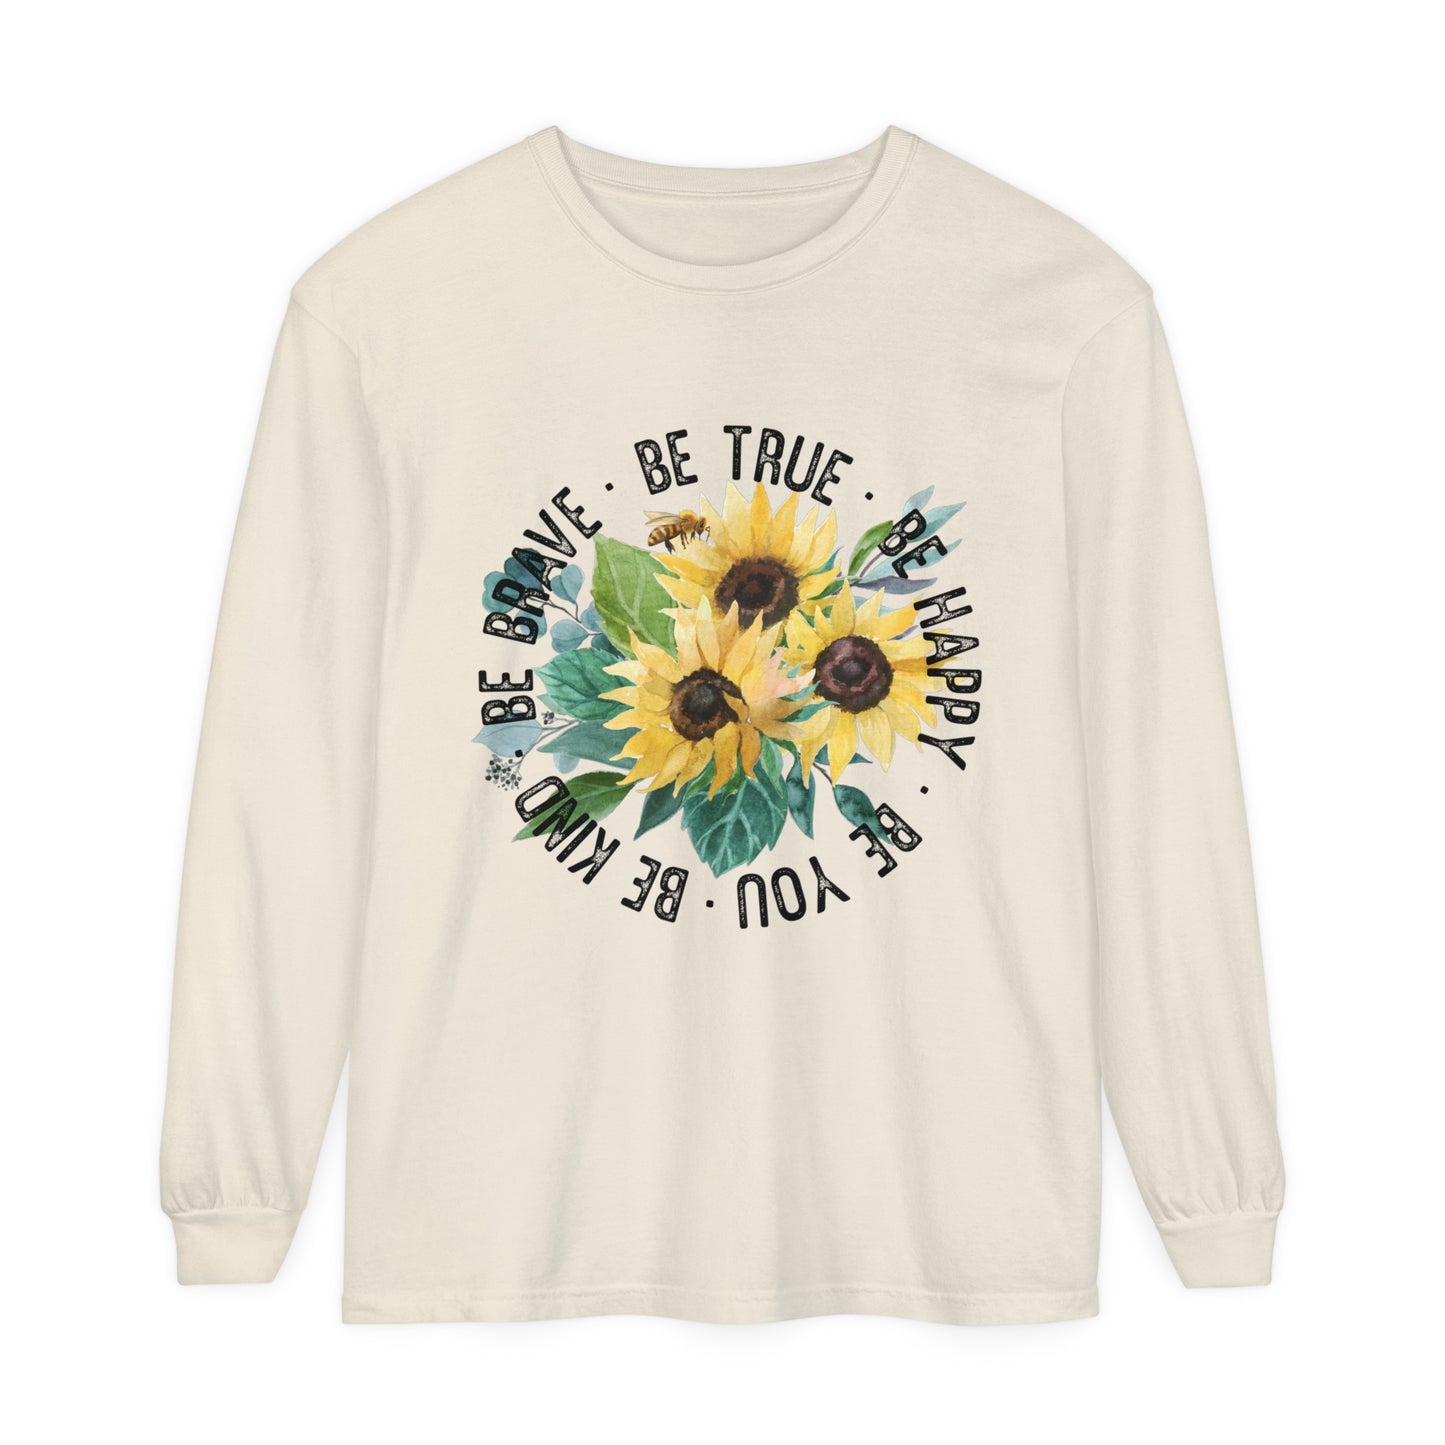 Be Kind, Be Brave, Be True, Be You, Be Happy Women's Loose Long Sleeve T-Shirt